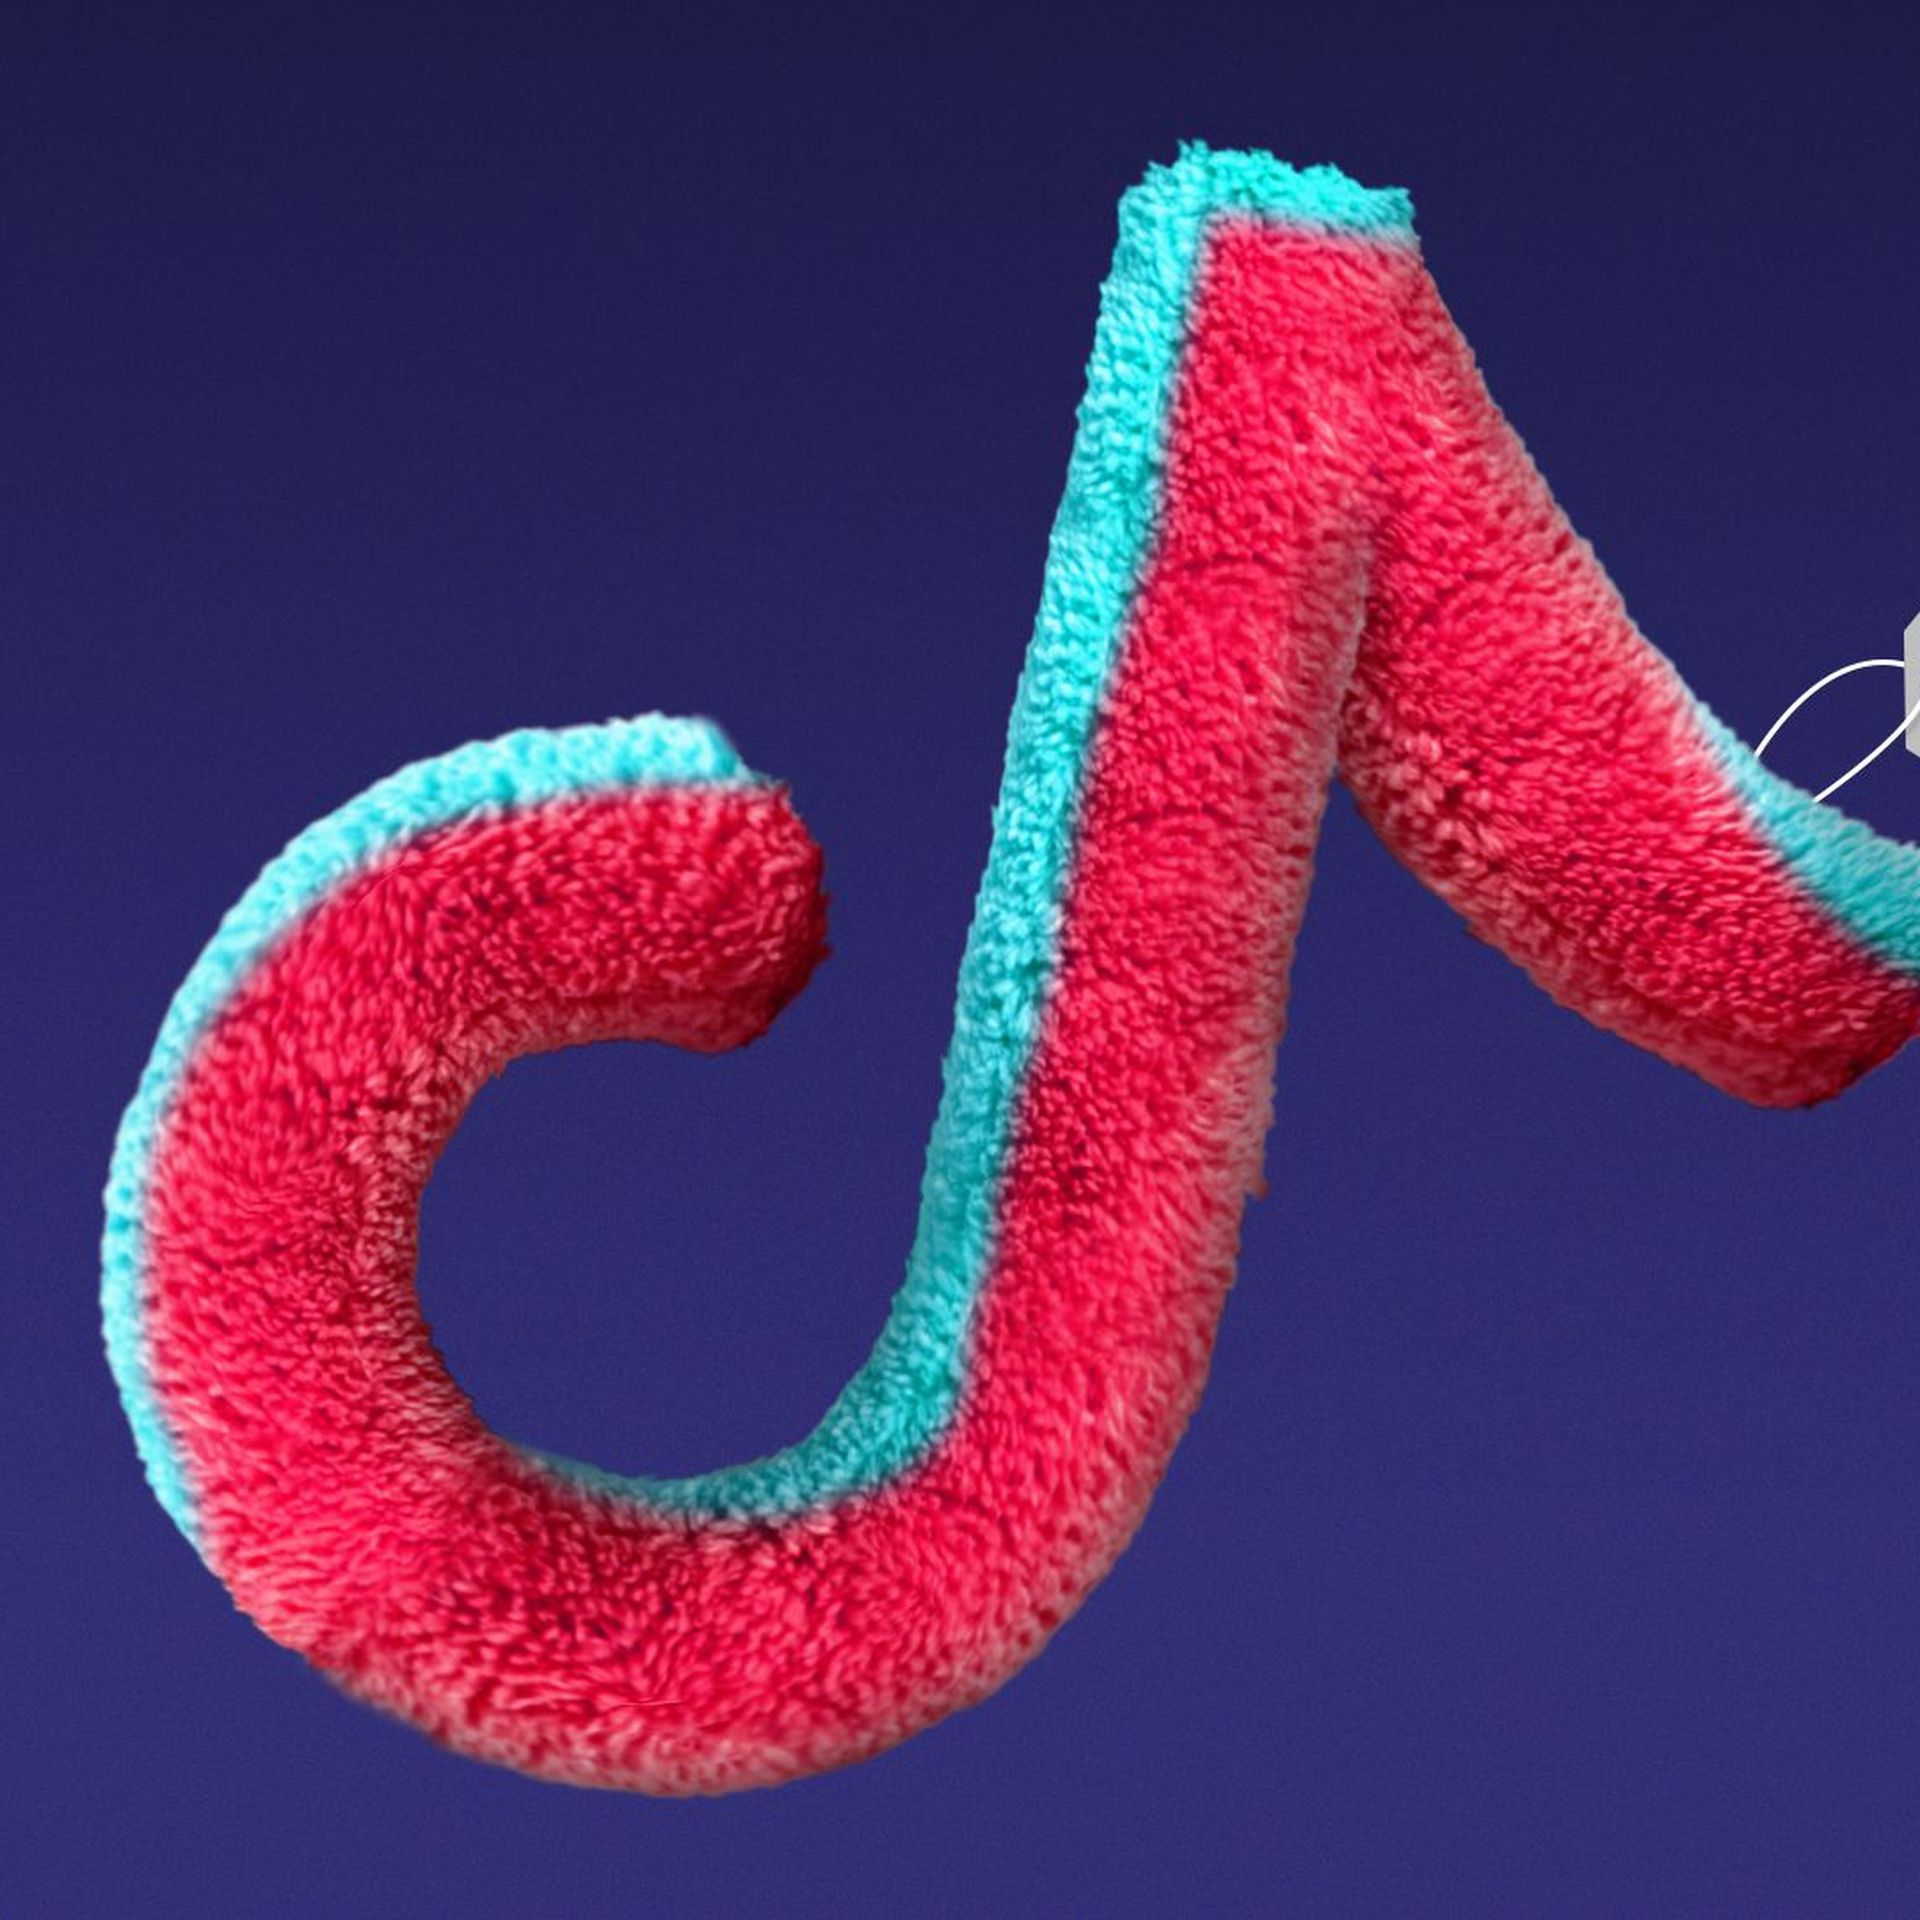 Illustration of a stuffed animal plush toy in the shape of the Tiktok logo 